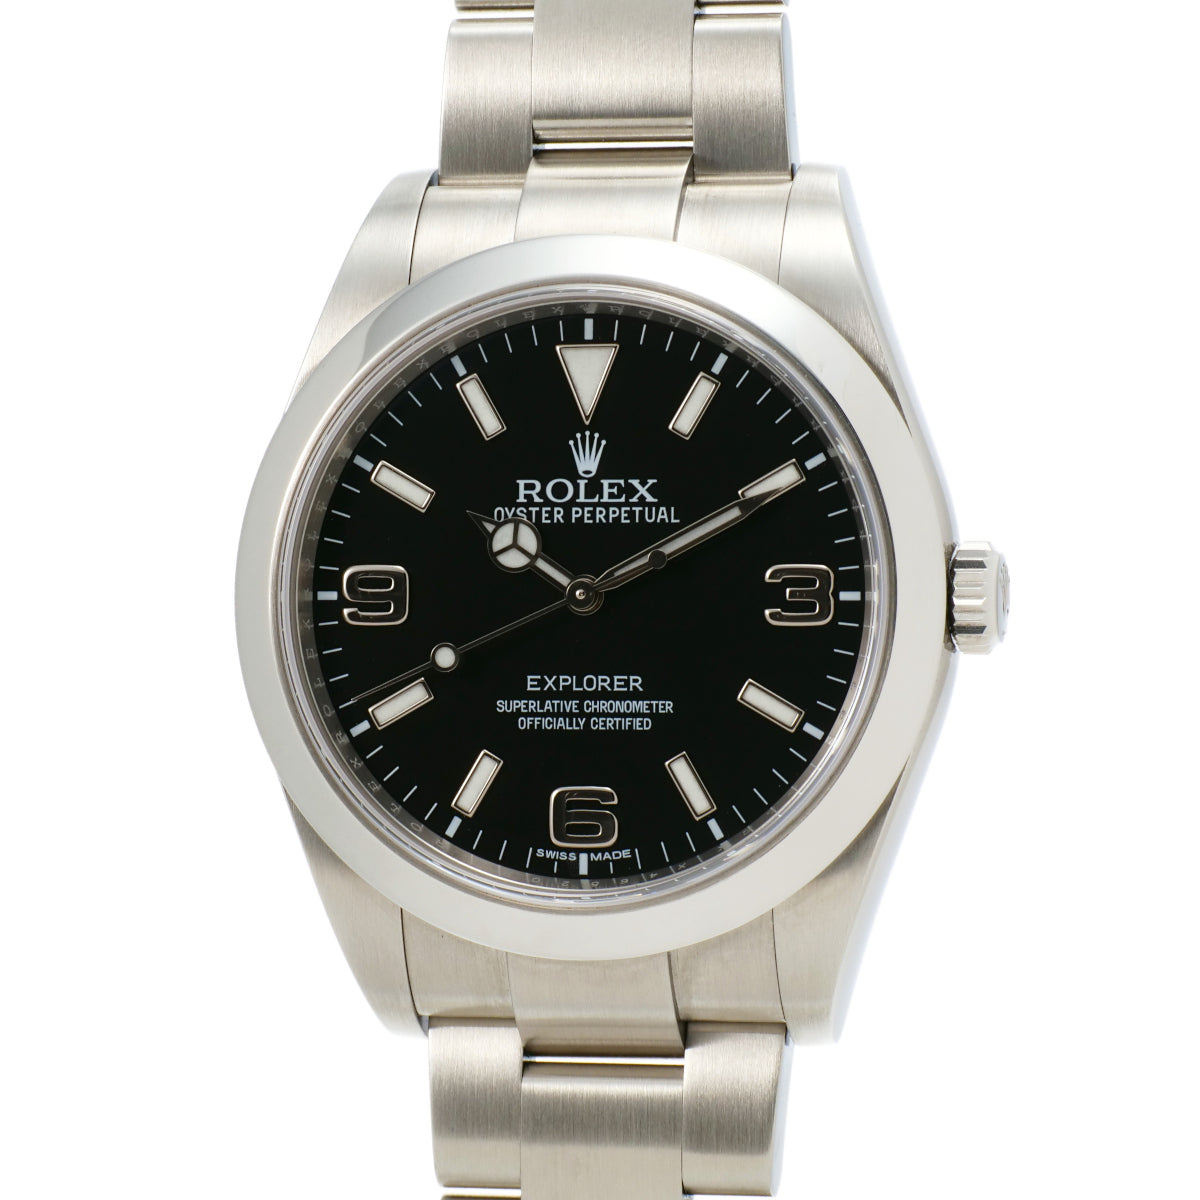 Rolex Explorer 1 Men's Watch 214270, Stainless Steel, Black Dial, Automatic 214270.0